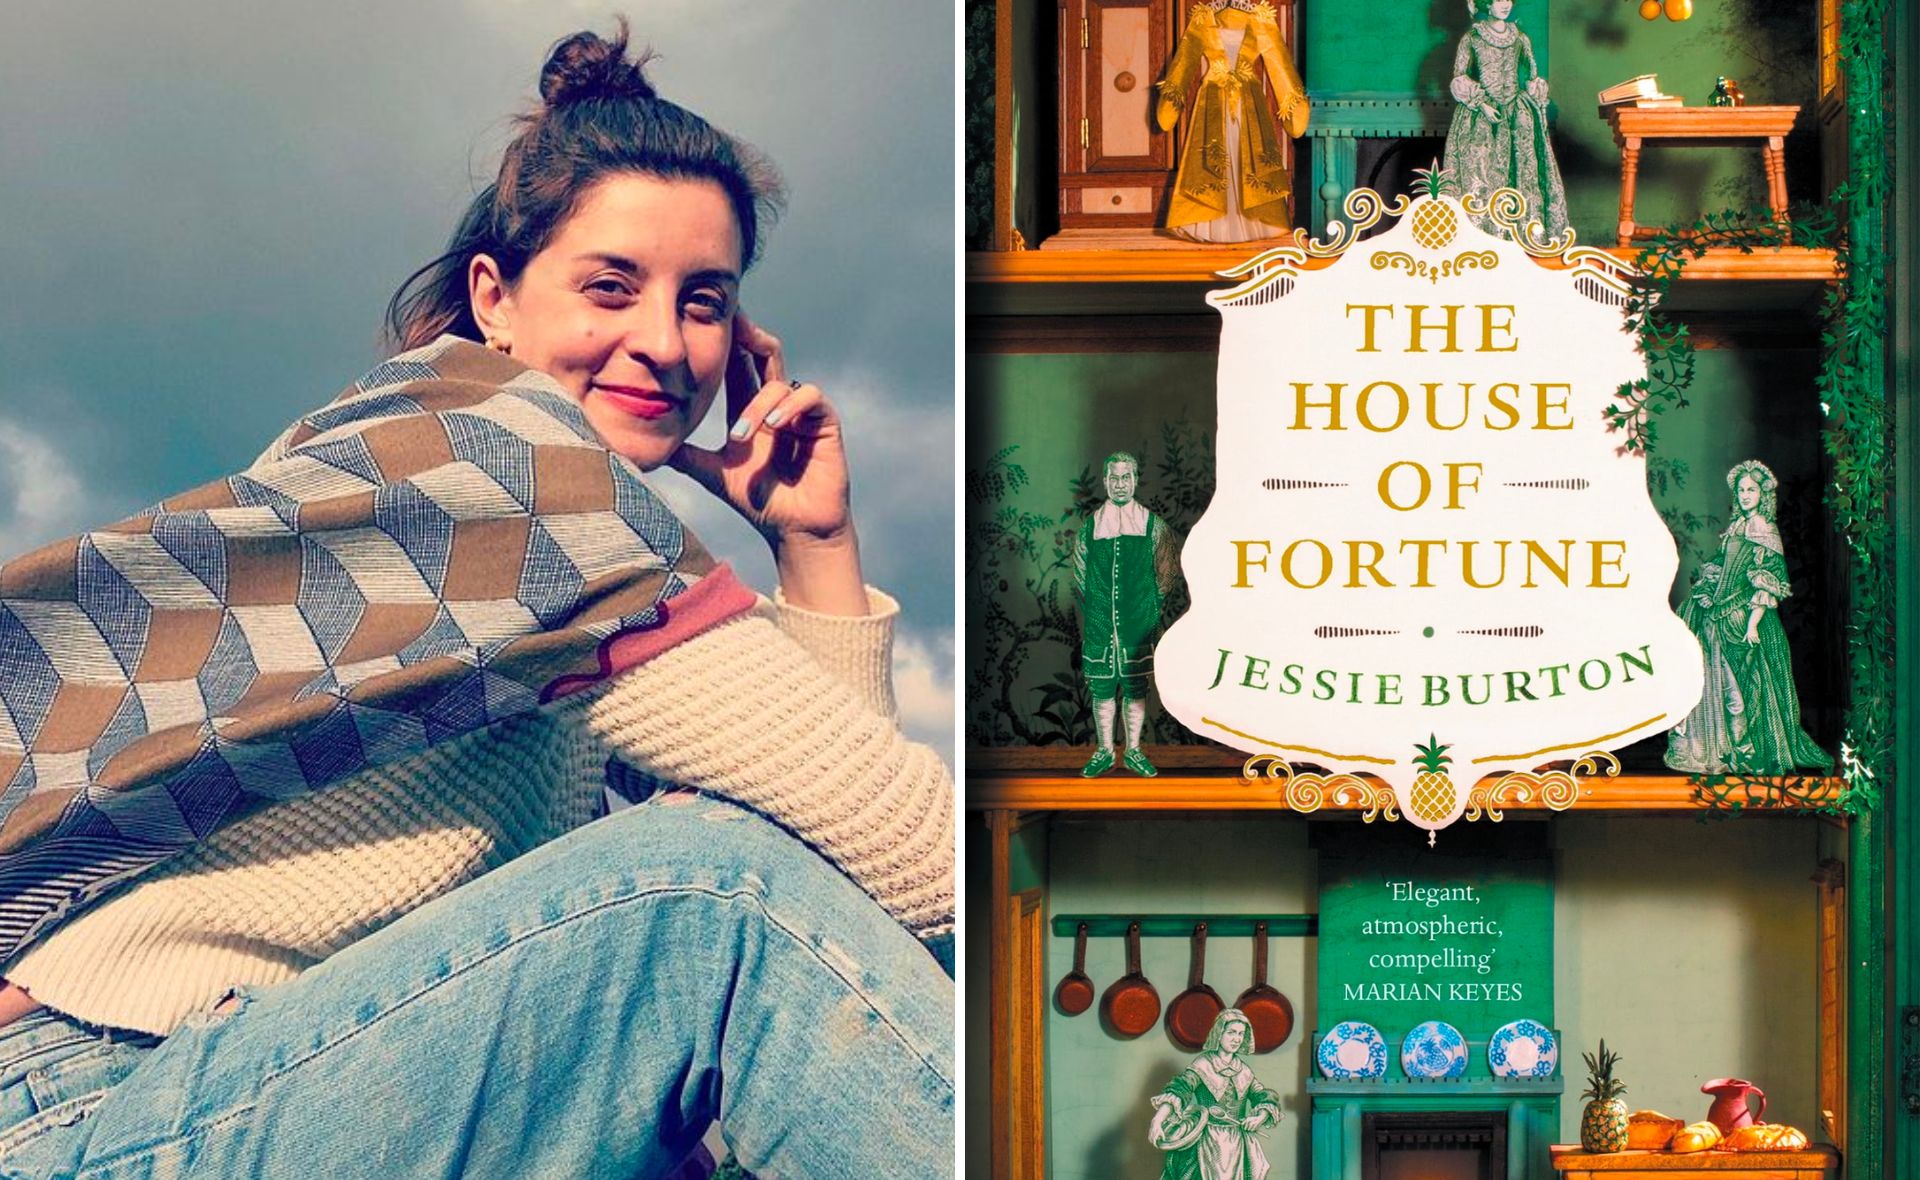 REVIEW: The one thing Jessie Burton “felt compelled” to do when writing The House of Fortune